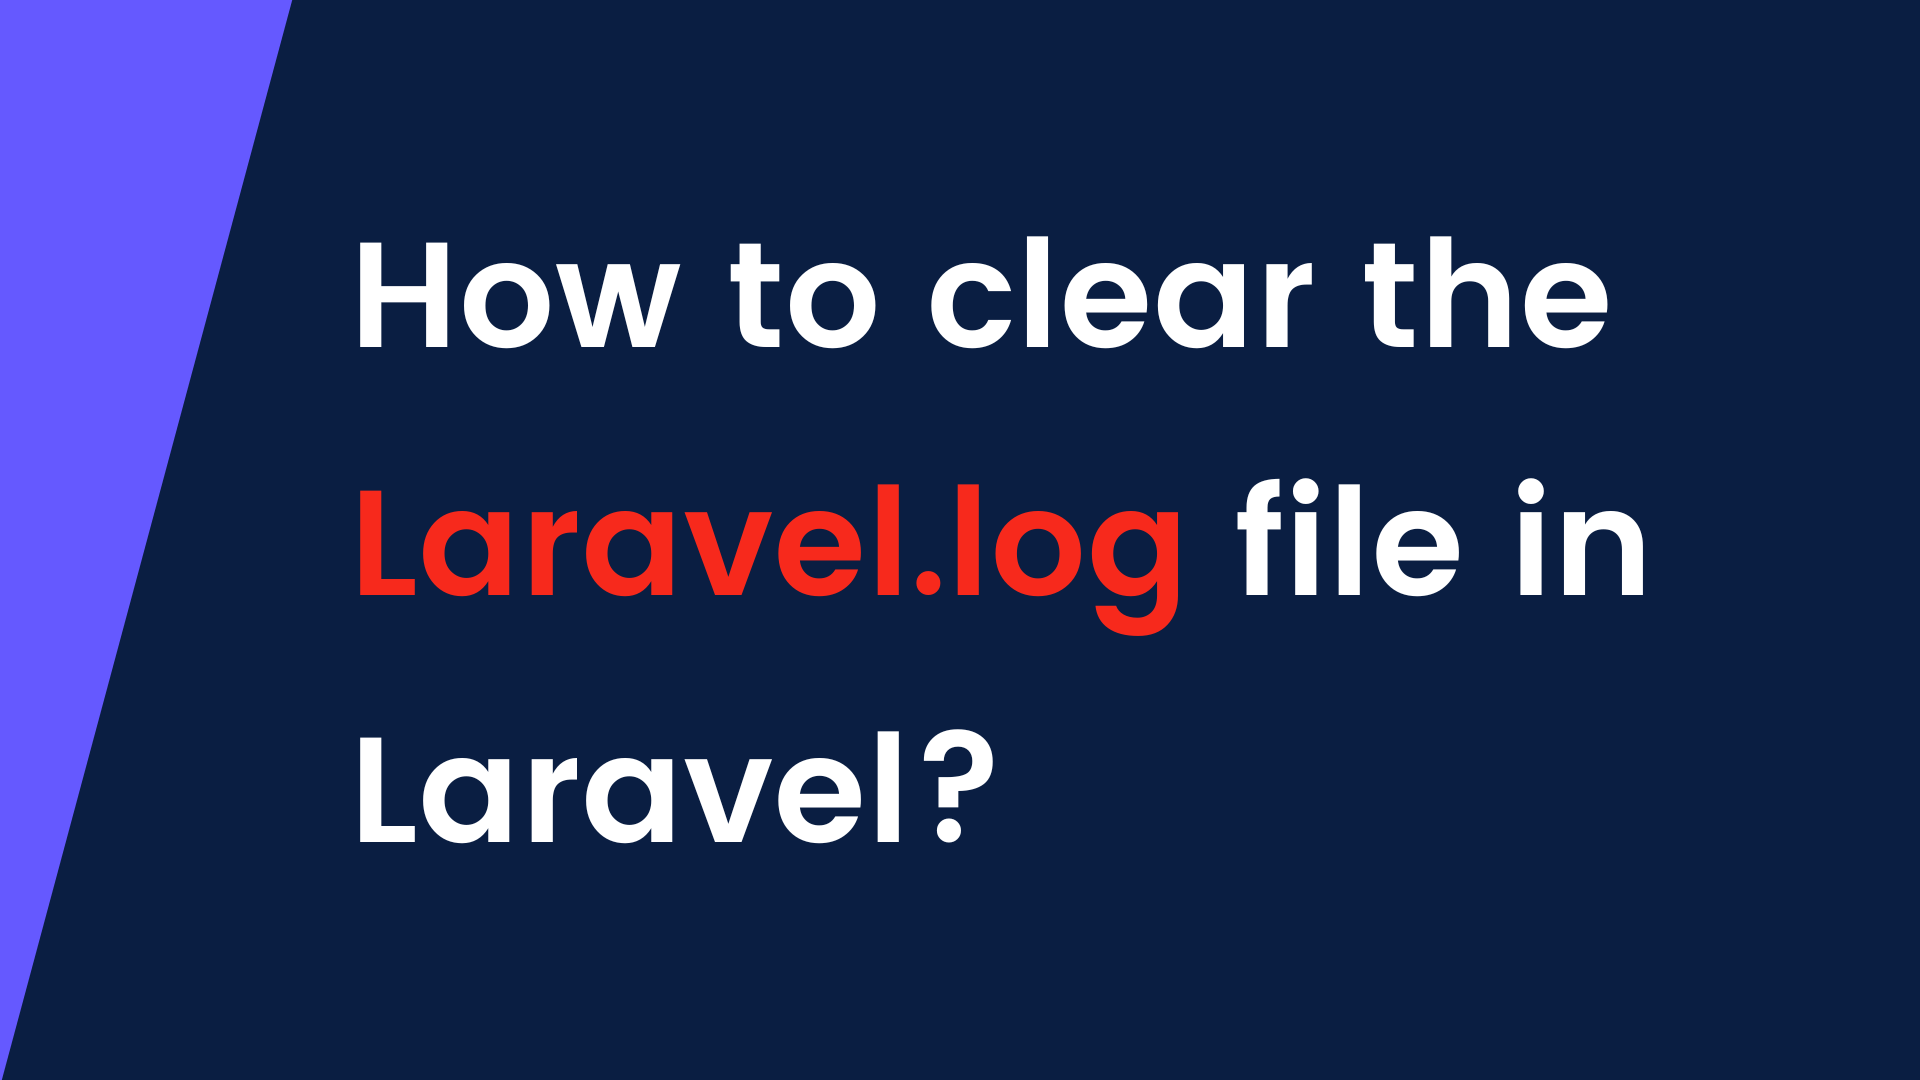 How to clear the Laravel.log file in Laravel?